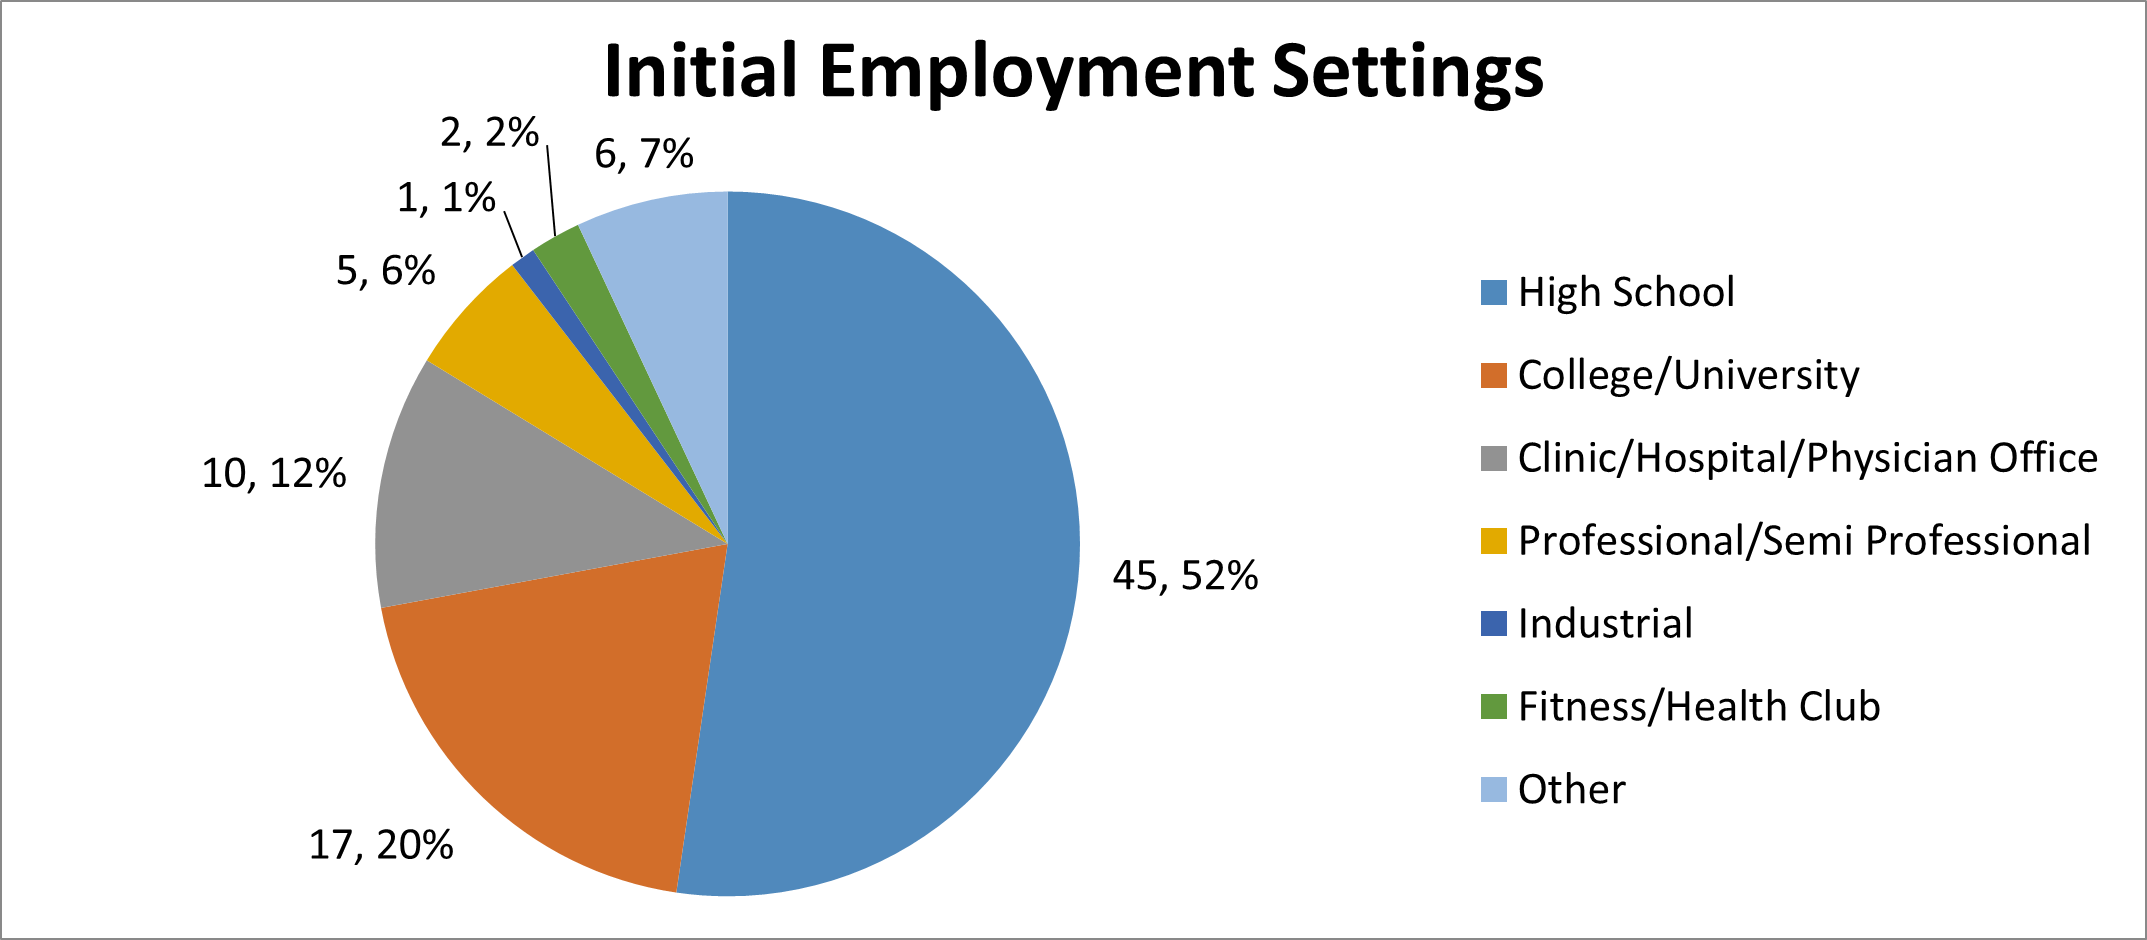 Image of athletic training program initial employment outcomes pie chart.